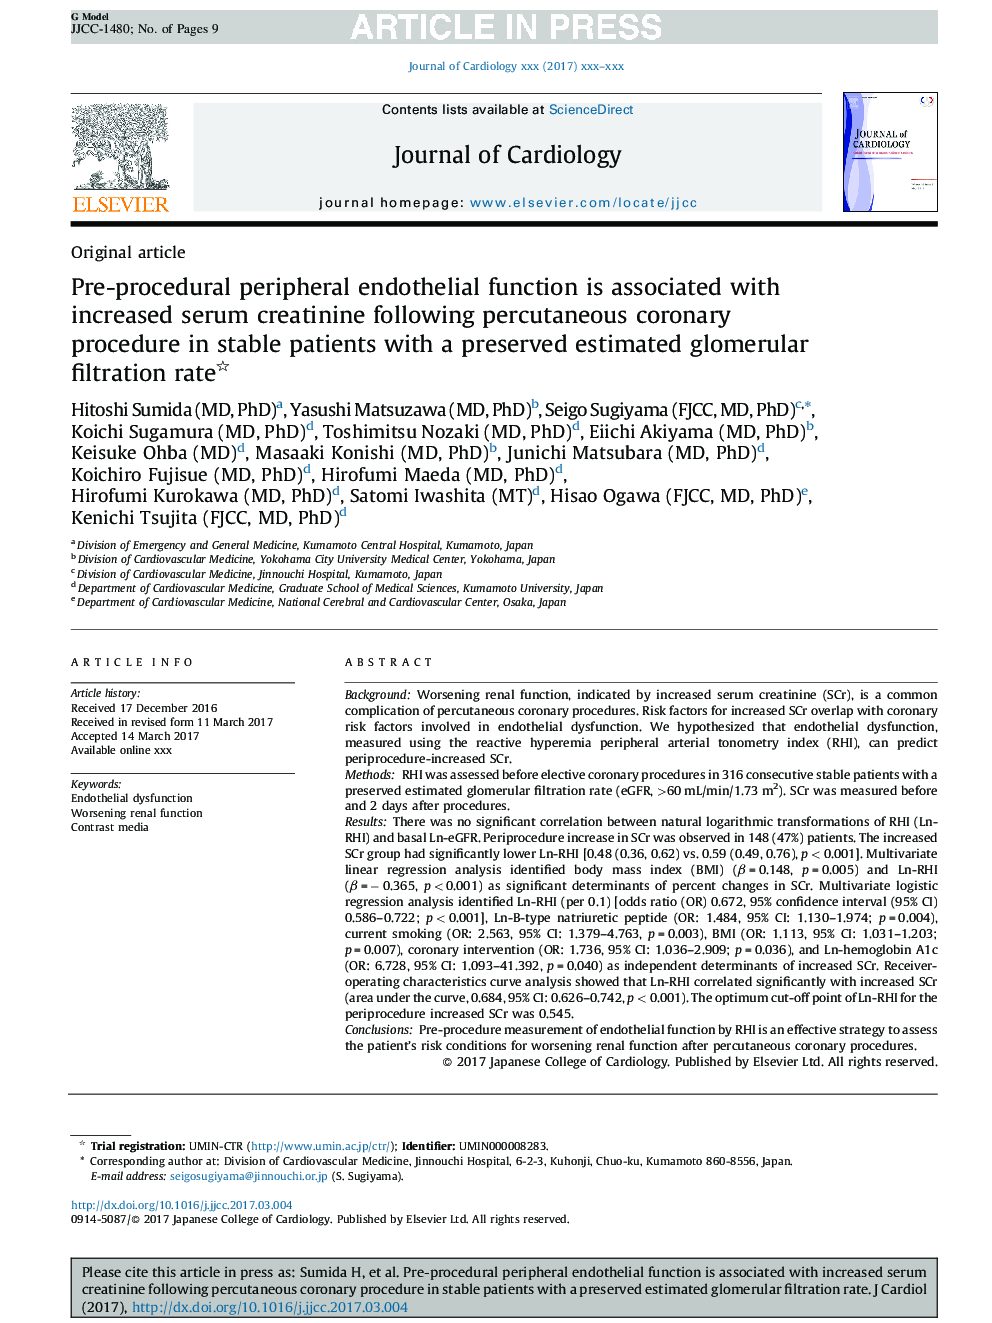 Pre-procedural peripheral endothelial function is associated with increased serum creatinine following percutaneous coronary procedure in stable patients with a preserved estimated glomerular filtration rate